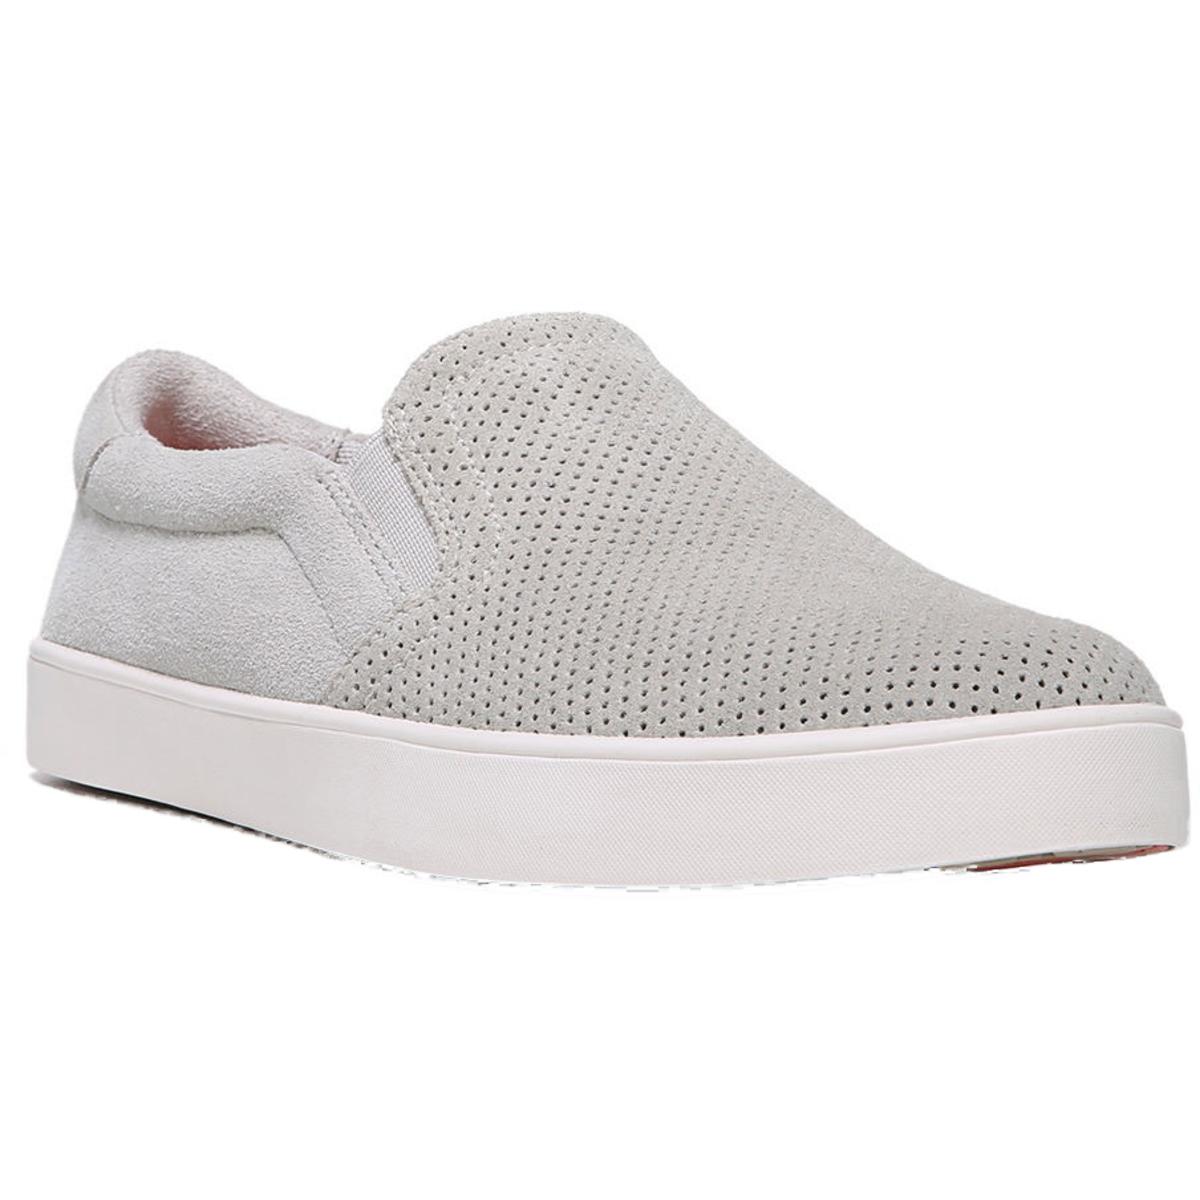 Dr. Scholl's Womens Madison Gray Slip-On Sneakers 11 Wide (C,D,W) BHFO ...